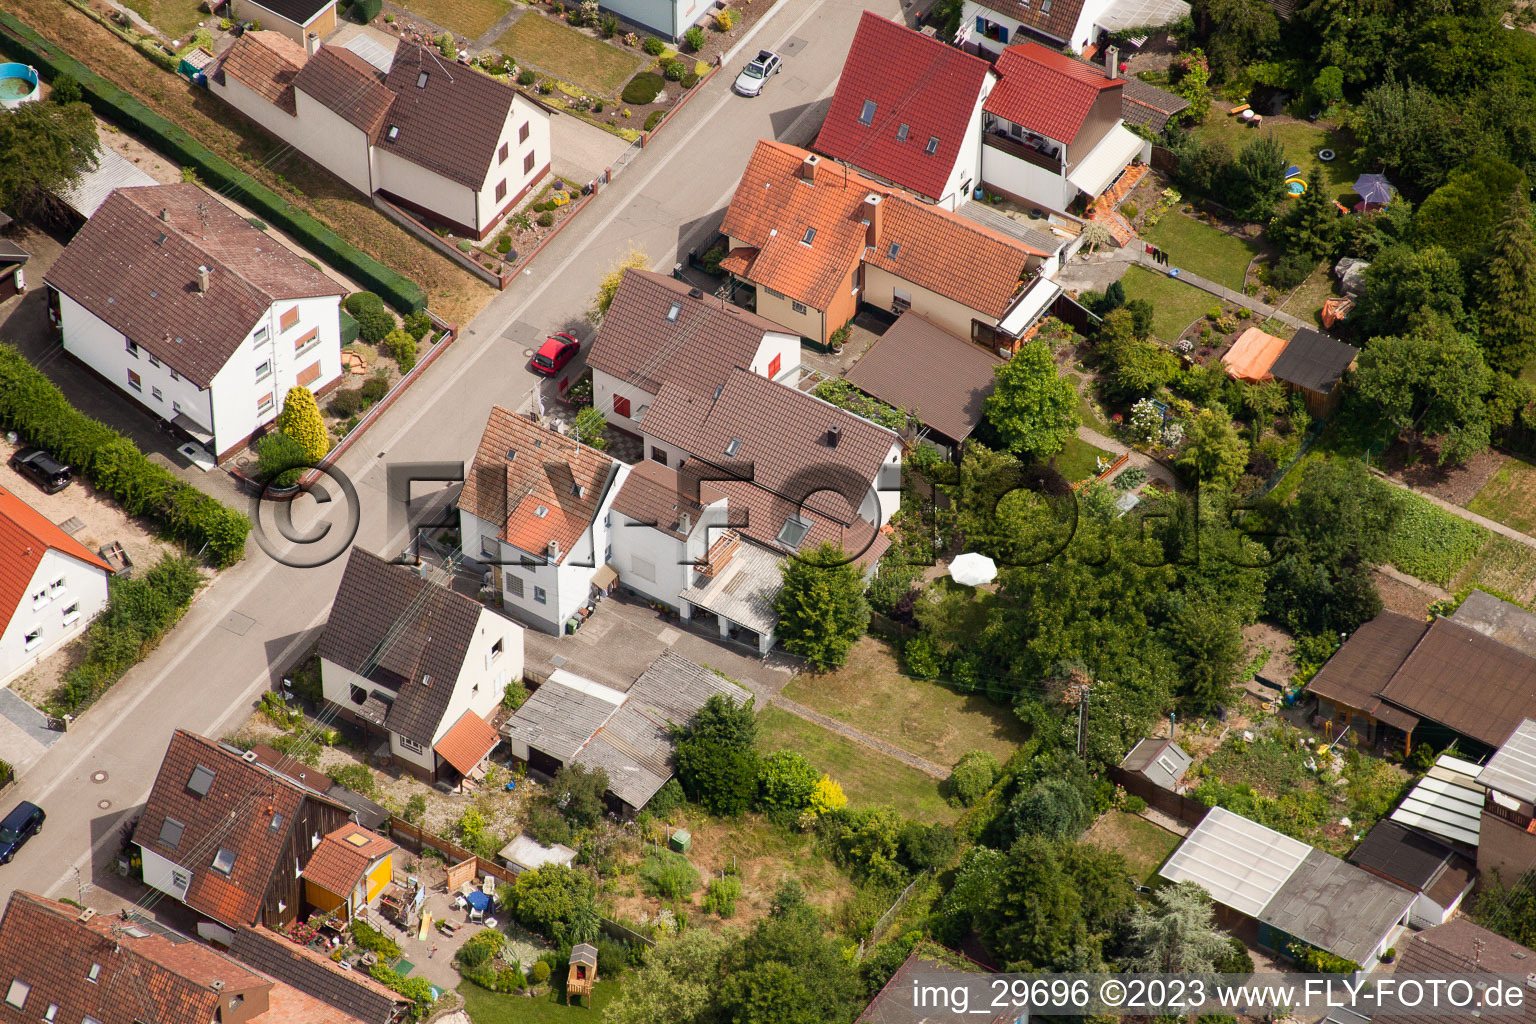 Aerial view of Waldstr in Kandel in the state Rhineland-Palatinate, Germany